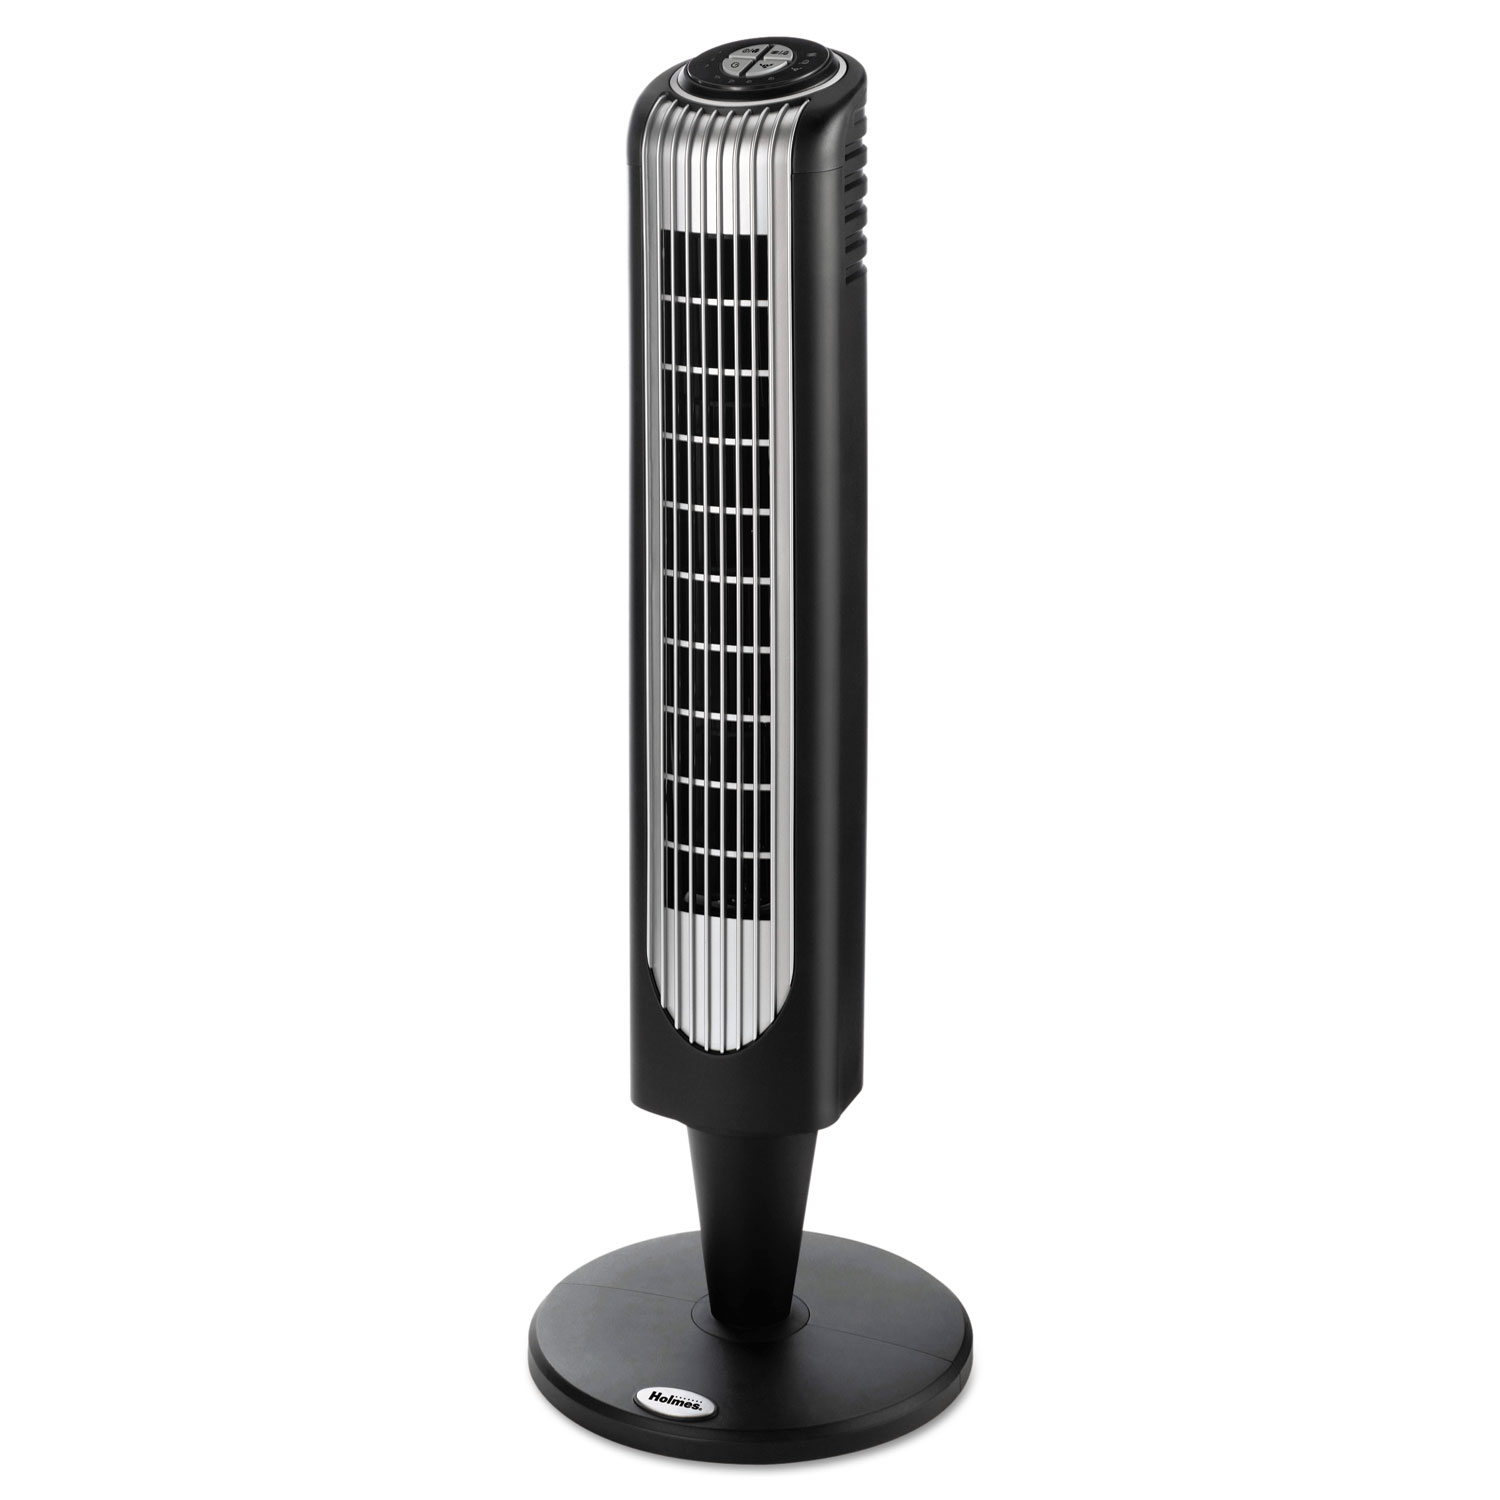 Three-Speed Oscillating Tower Fan with Remote Control, Metallic Silver/Black